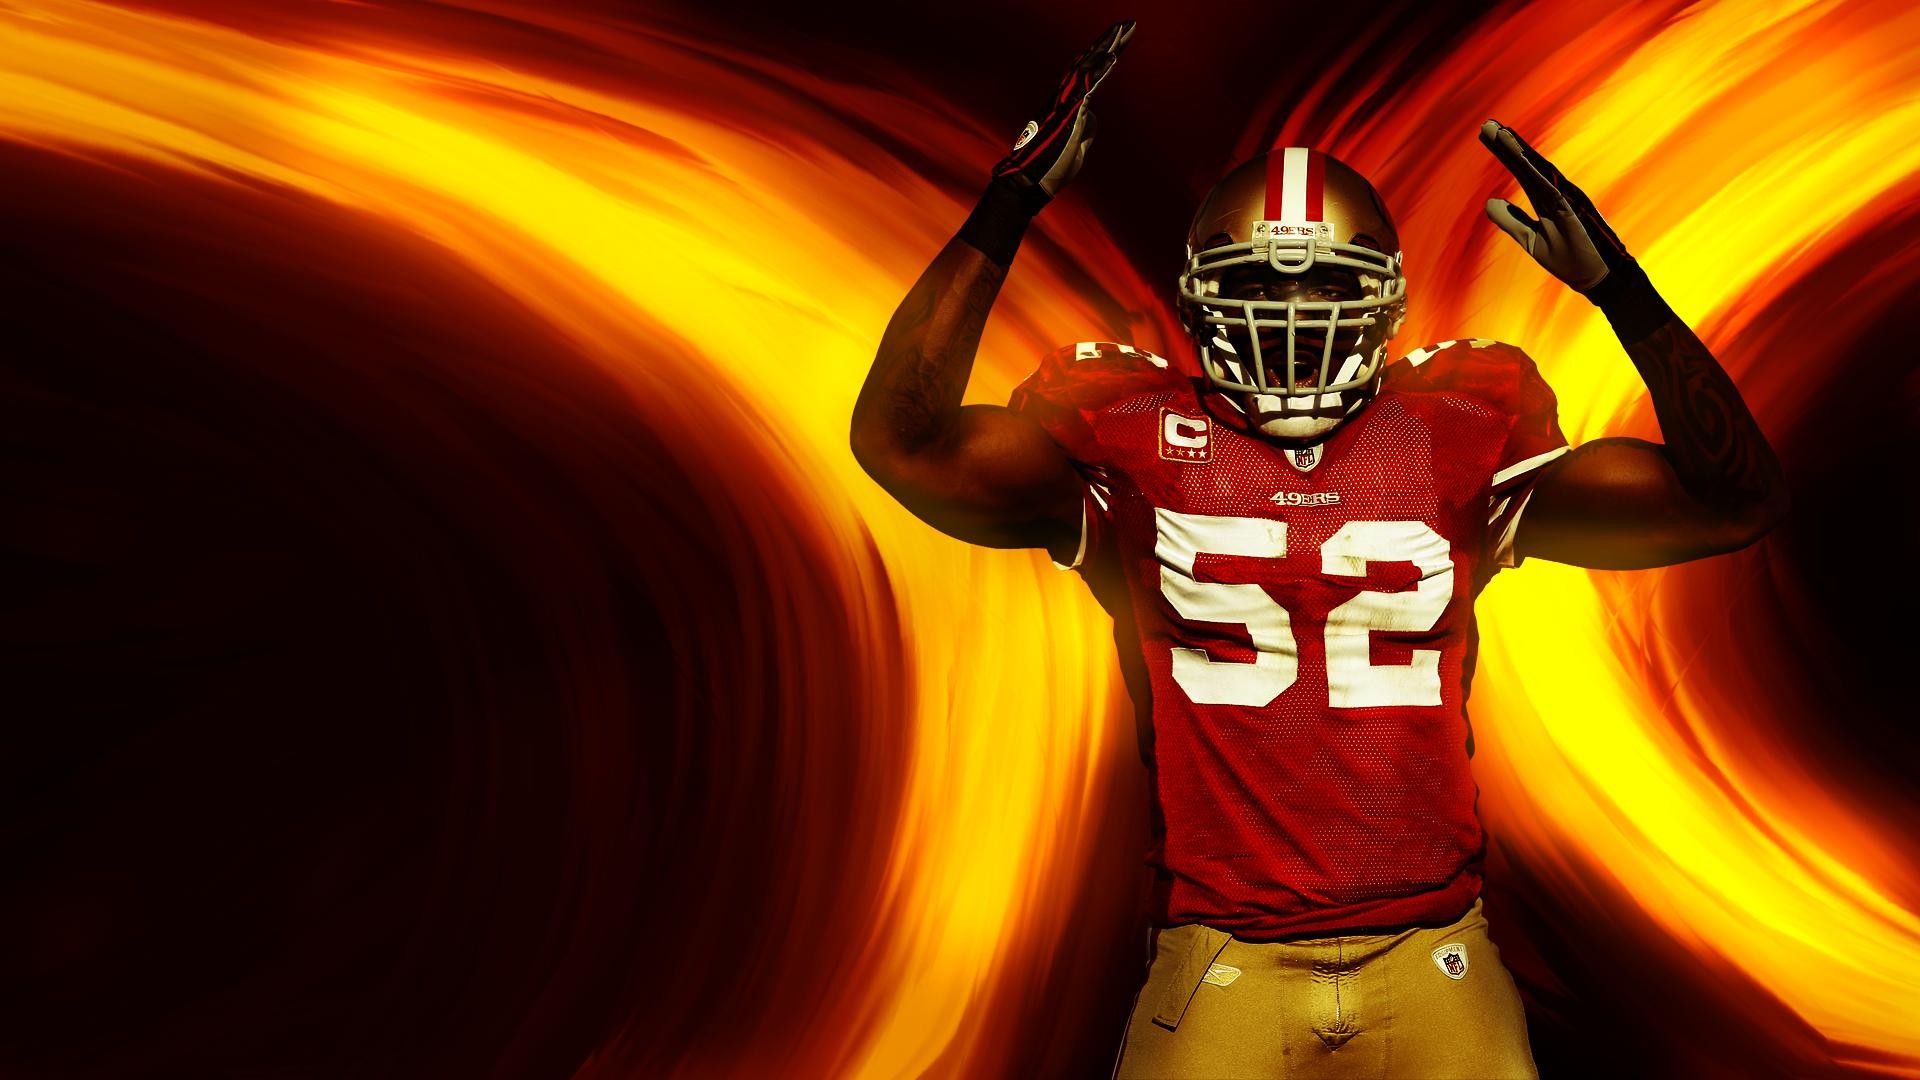 Wallpaper Desktop San Francisco 49ers HD with high-resolution 1920x1080 pixel. You can use this wallpaper for your Mac or Windows Desktop Background, iPhone, Android or Tablet and another Smartphone device